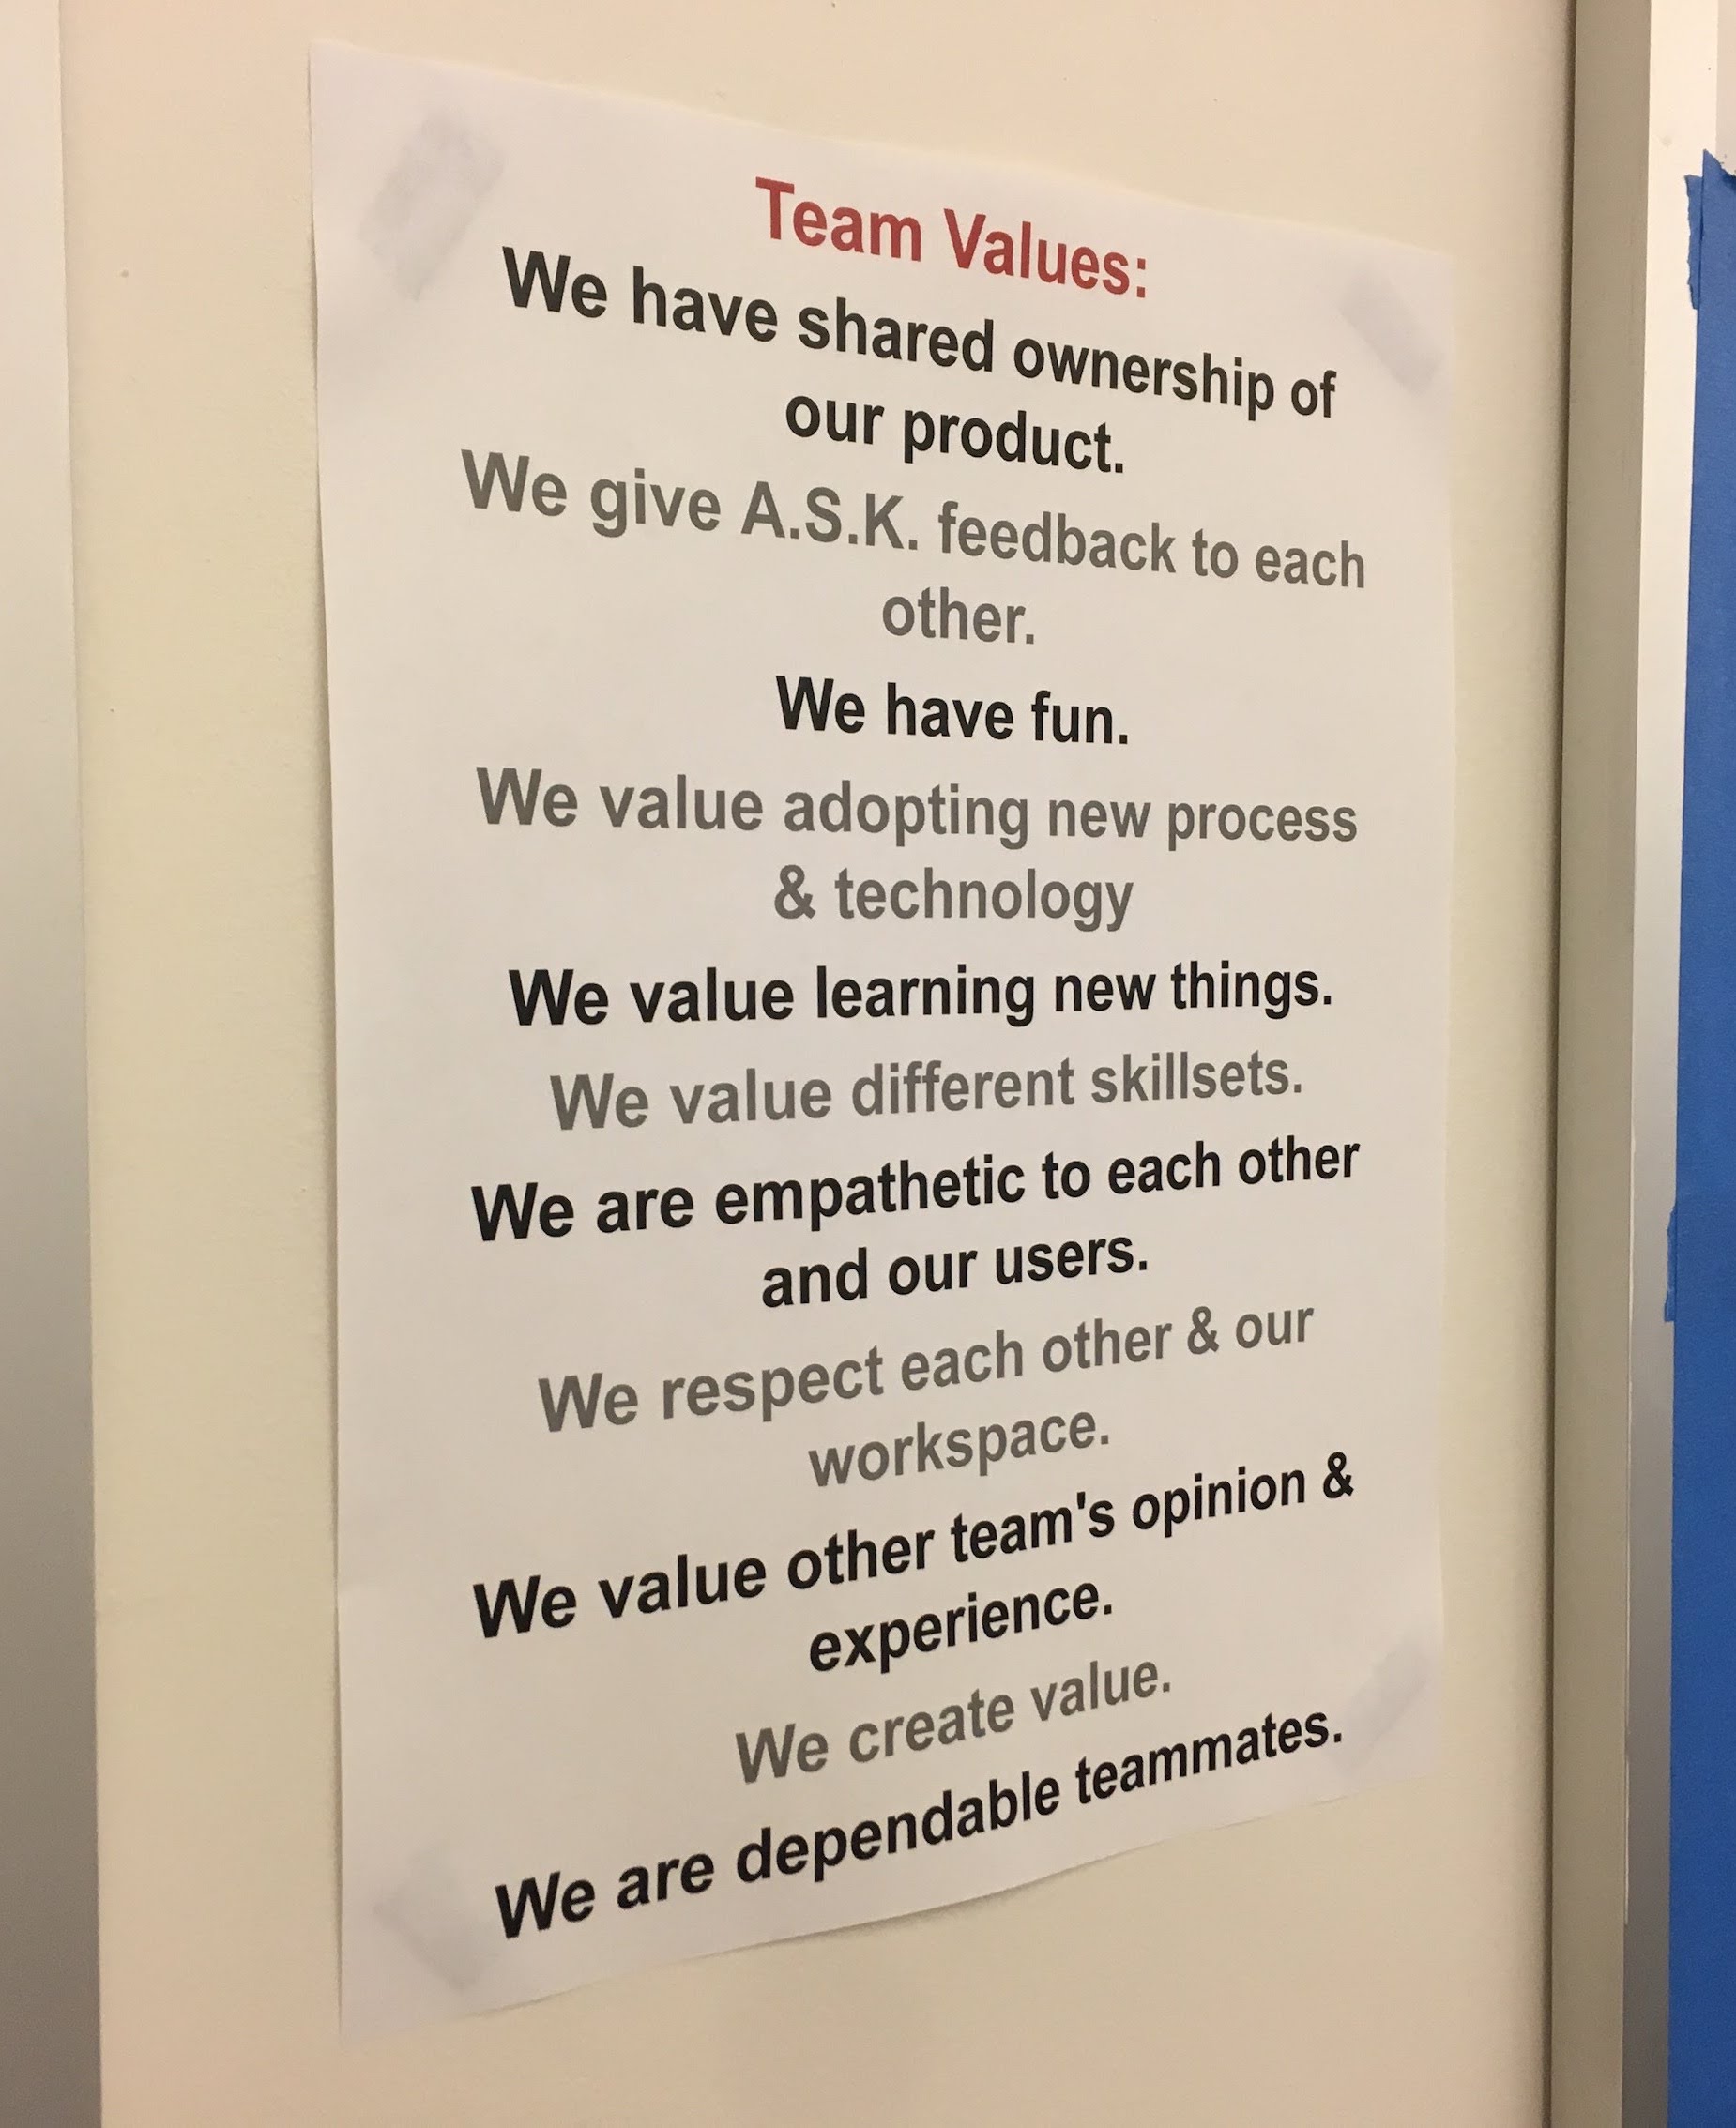 Summarized value statements up on the wall in team project area